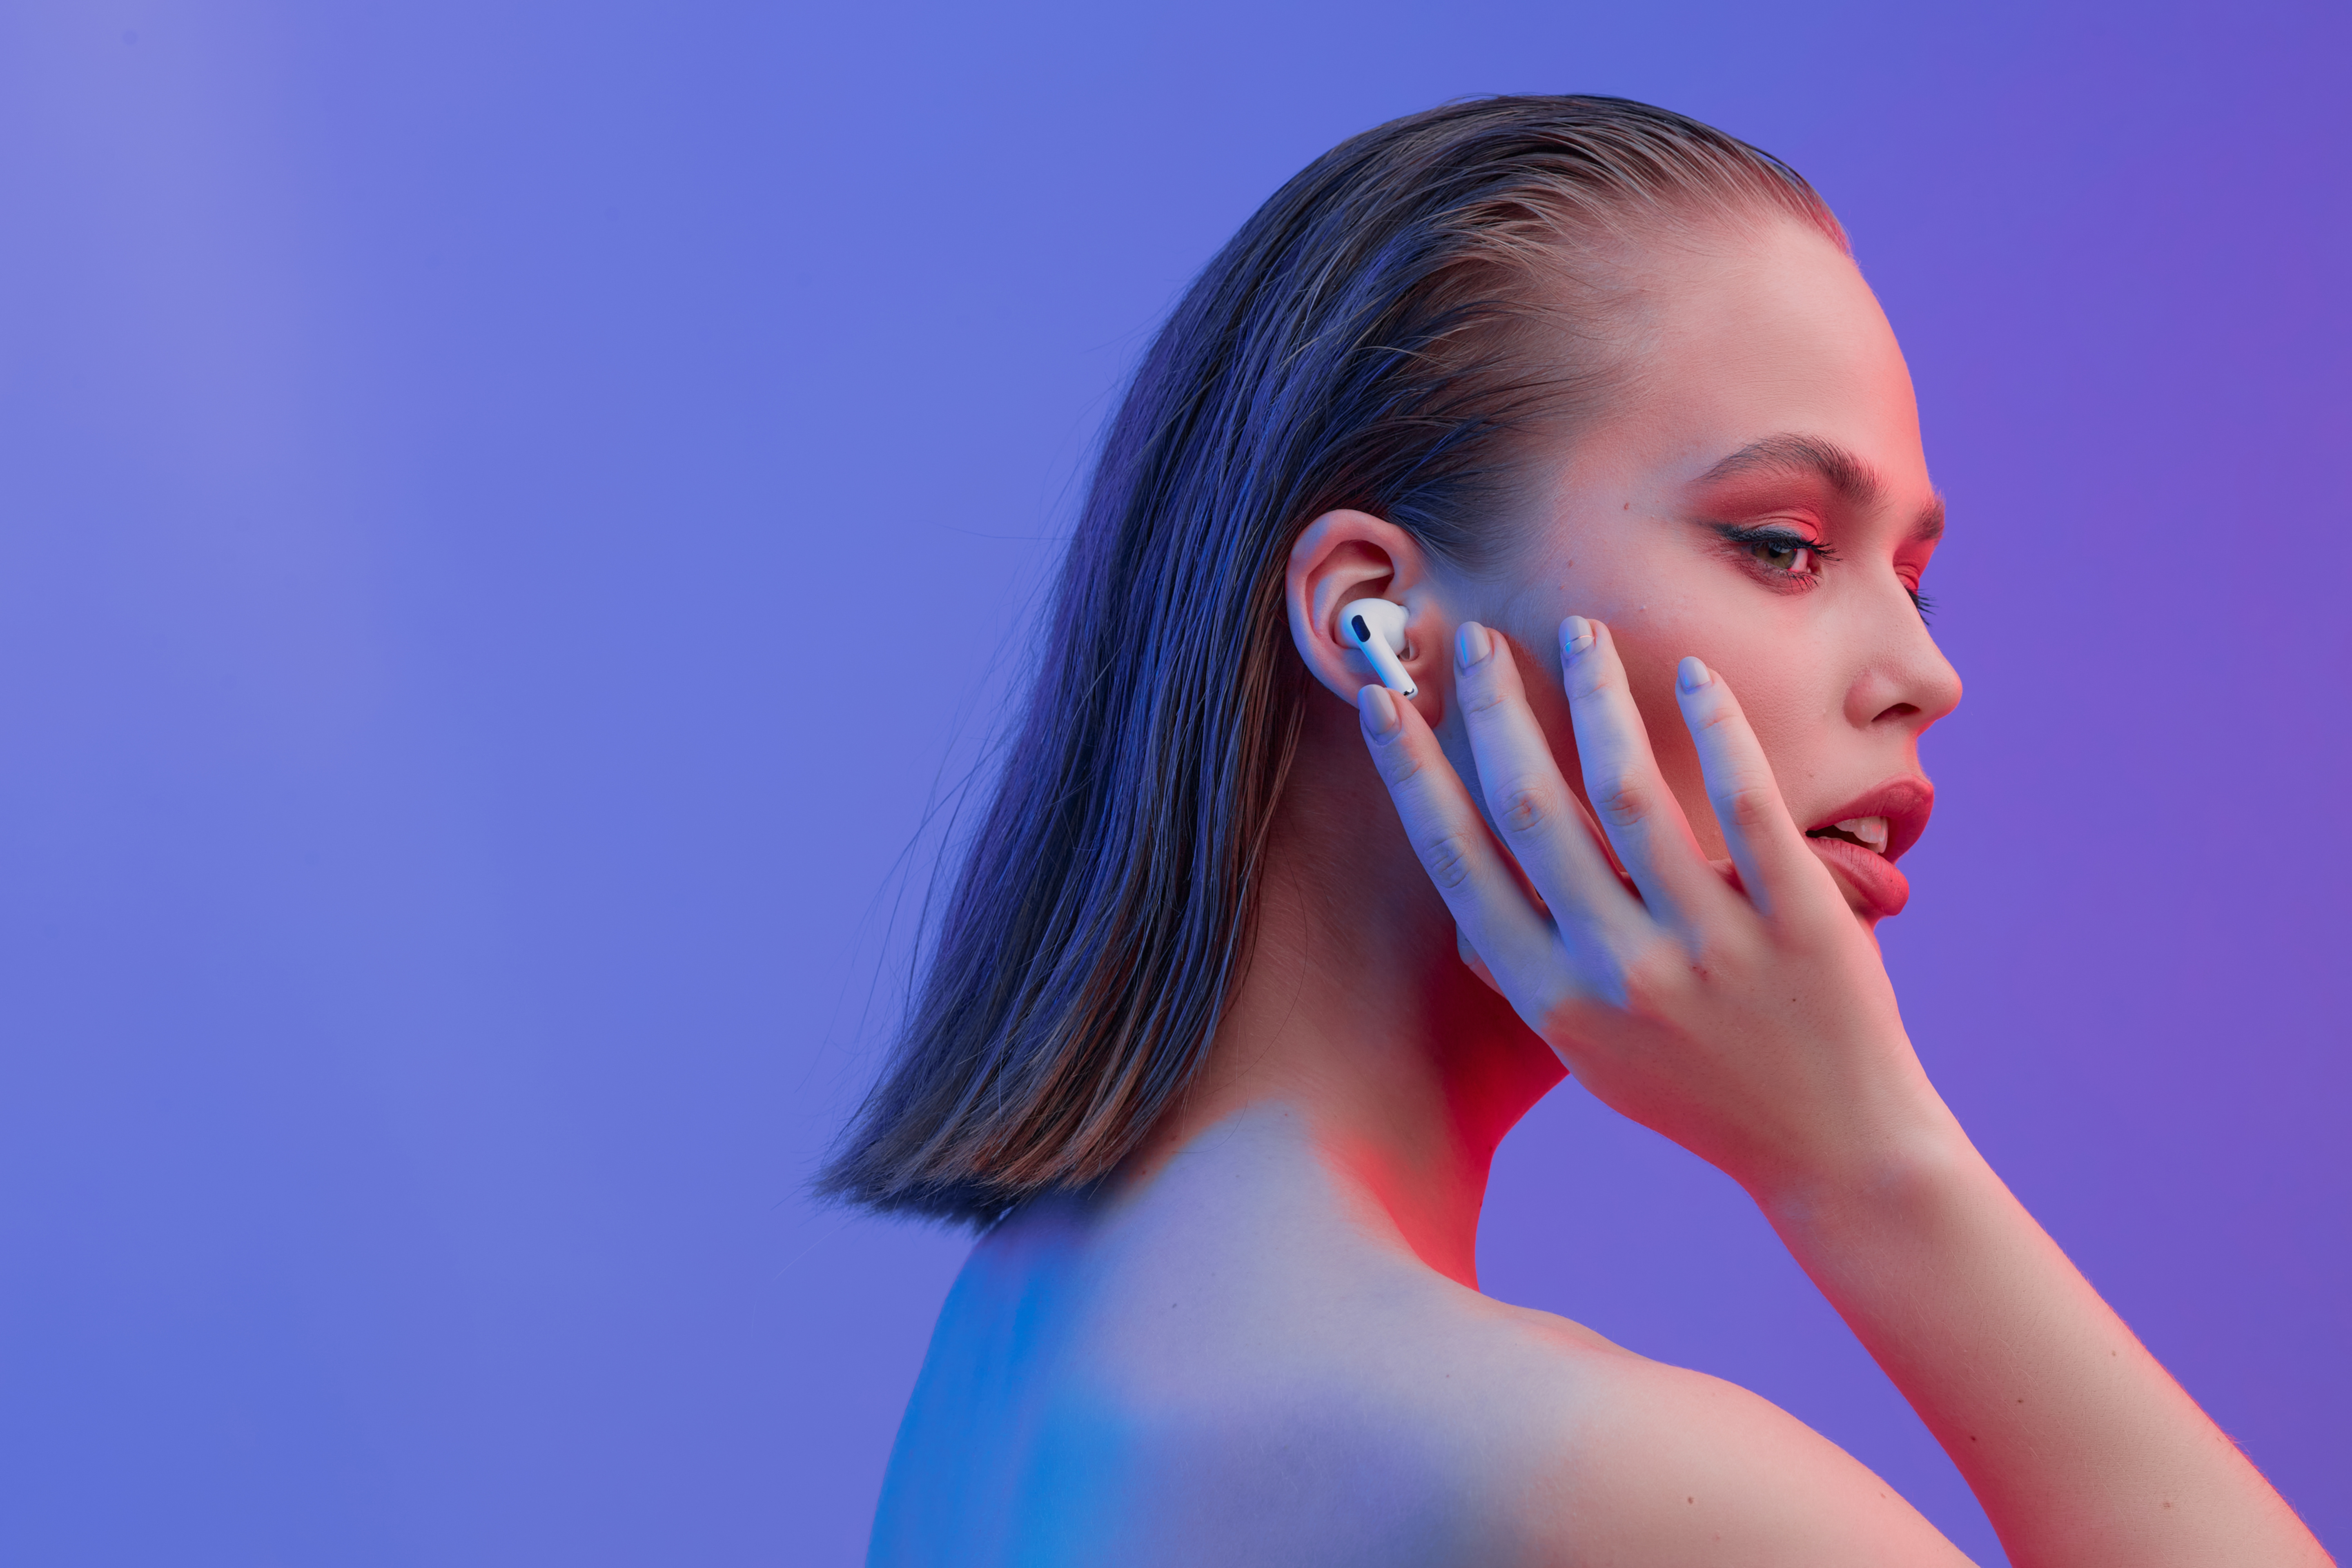 Apple AirPods Are on Sale for Just $80 on Cyber Monday & You Can Shop Them Here